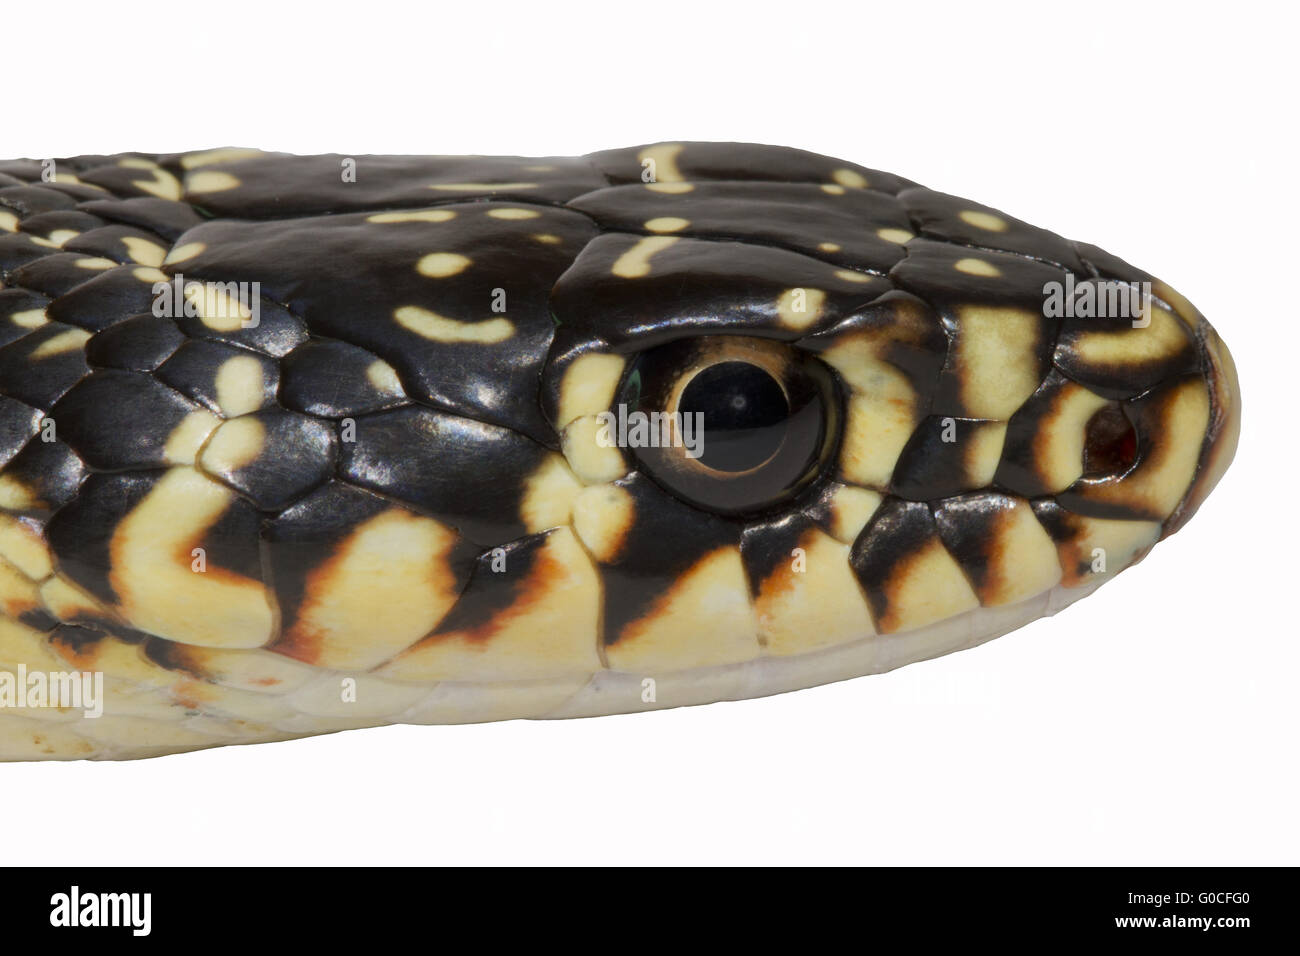 head from a whip snake Stock Photo